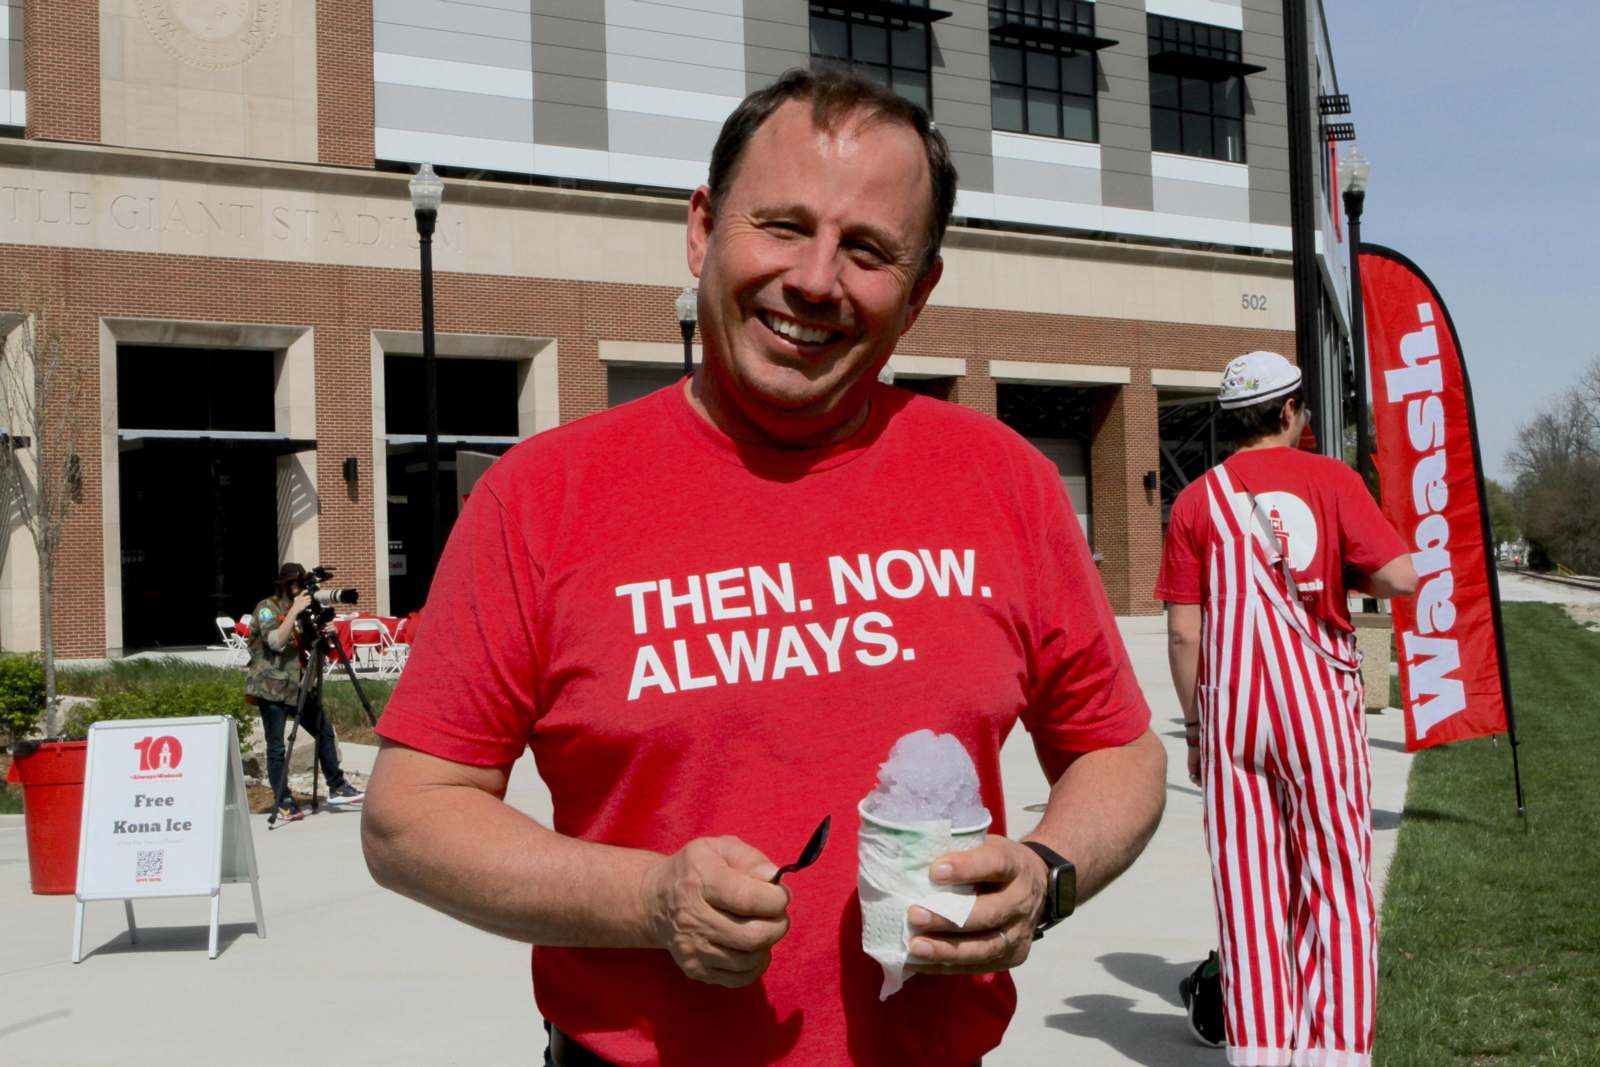 a man in a red shirt holding a spoon and ice cream